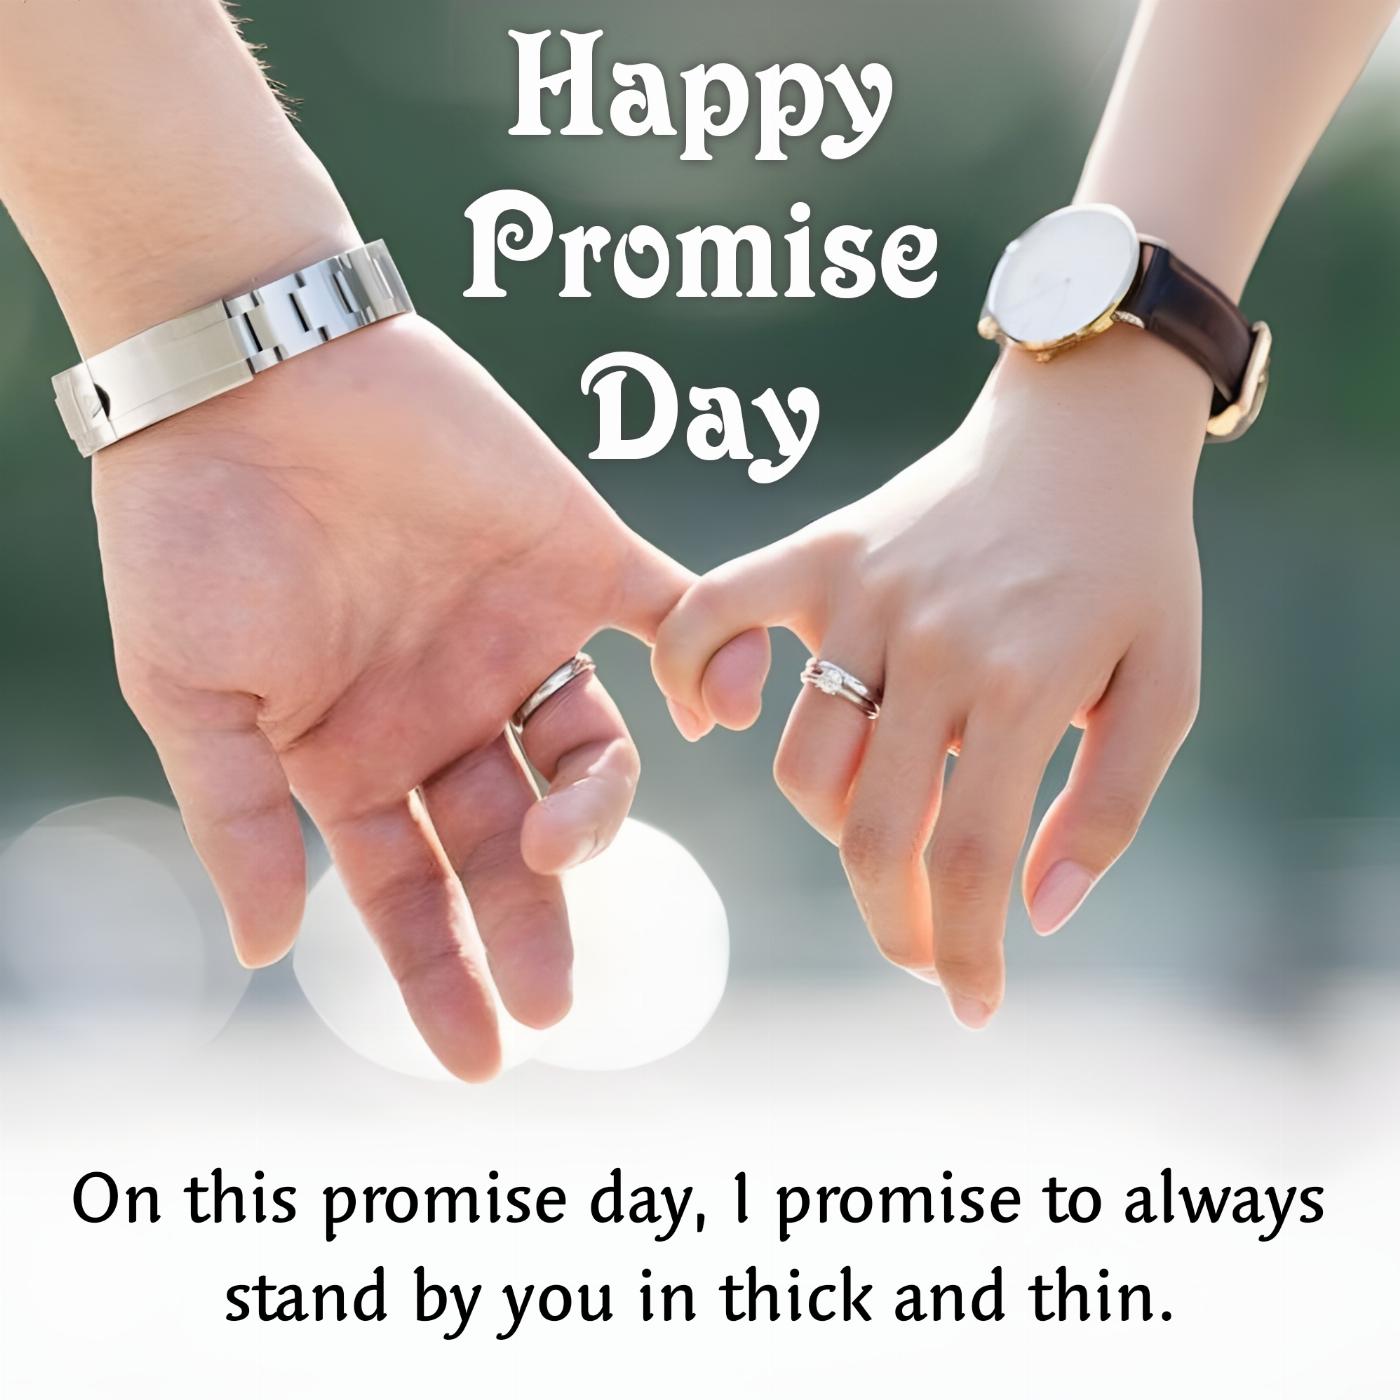 On this promise day I promise to always stand by you in thick and thin